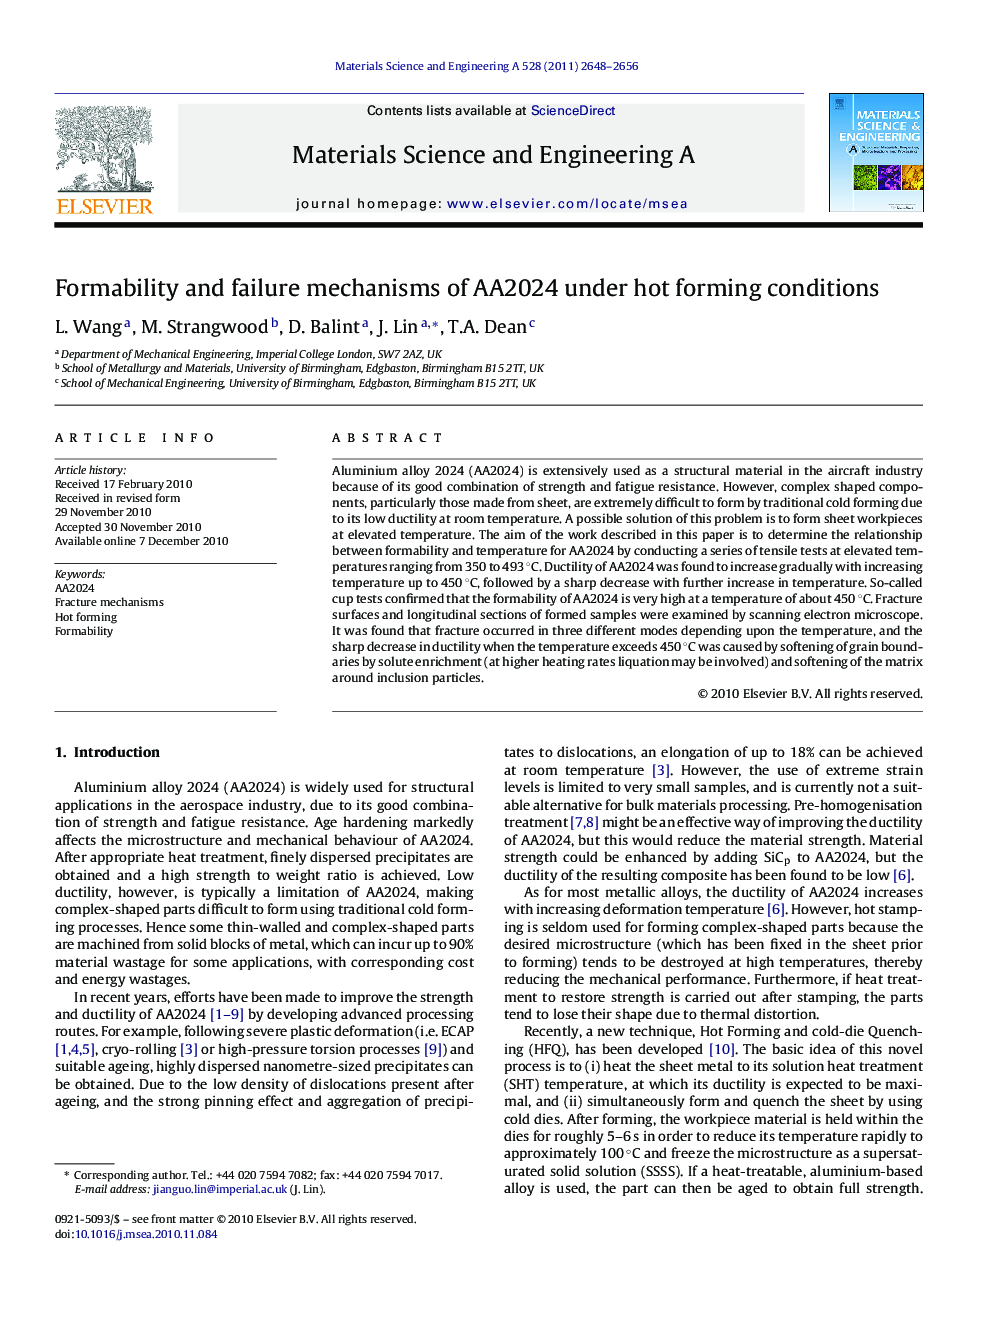 Formability and failure mechanisms of AA2024 under hot forming conditions